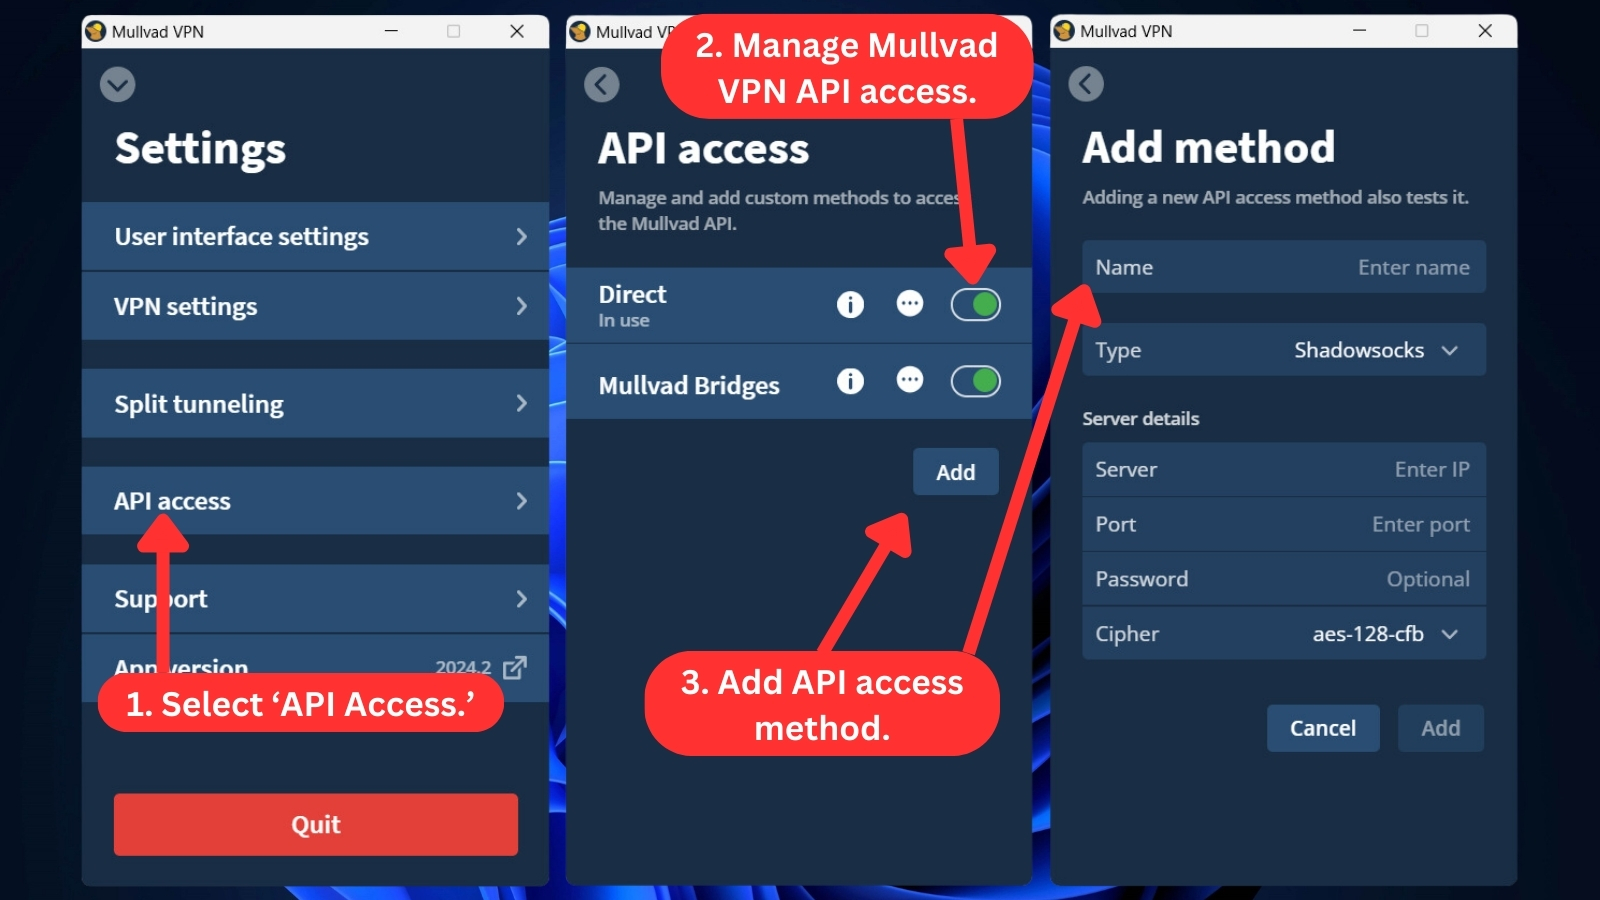 How to manage and add new Mullvad API access methods